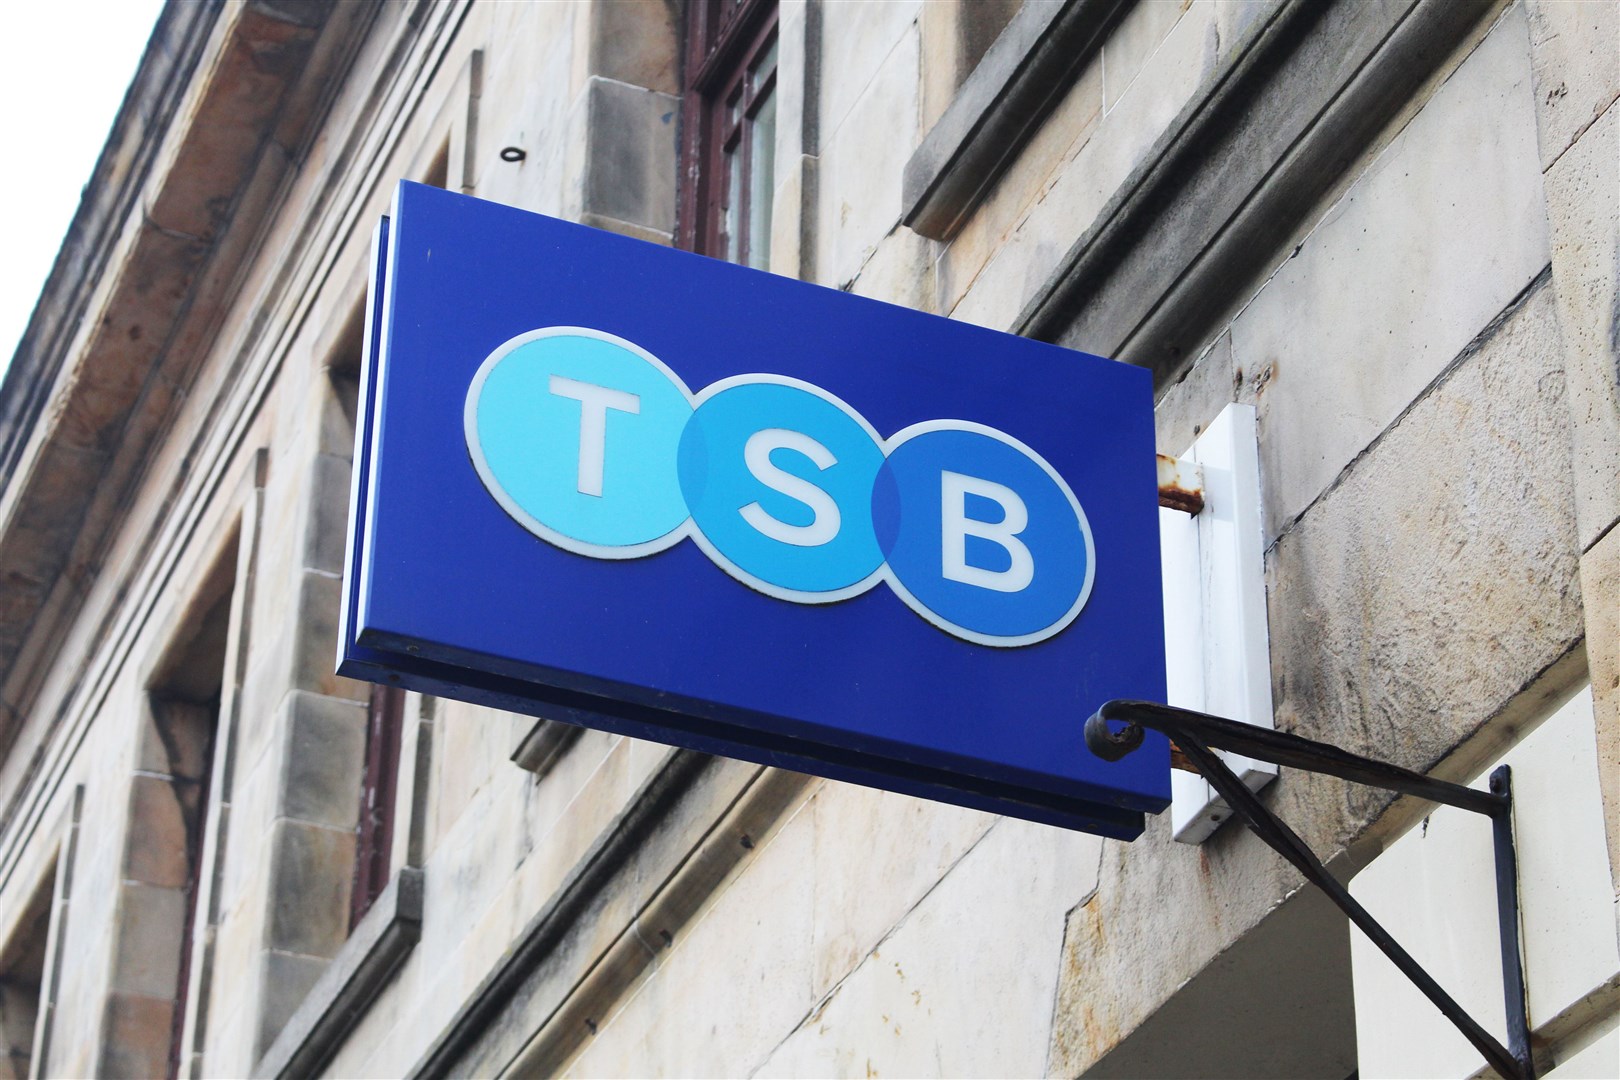 The TSB still plans to close its Tain branch in June.